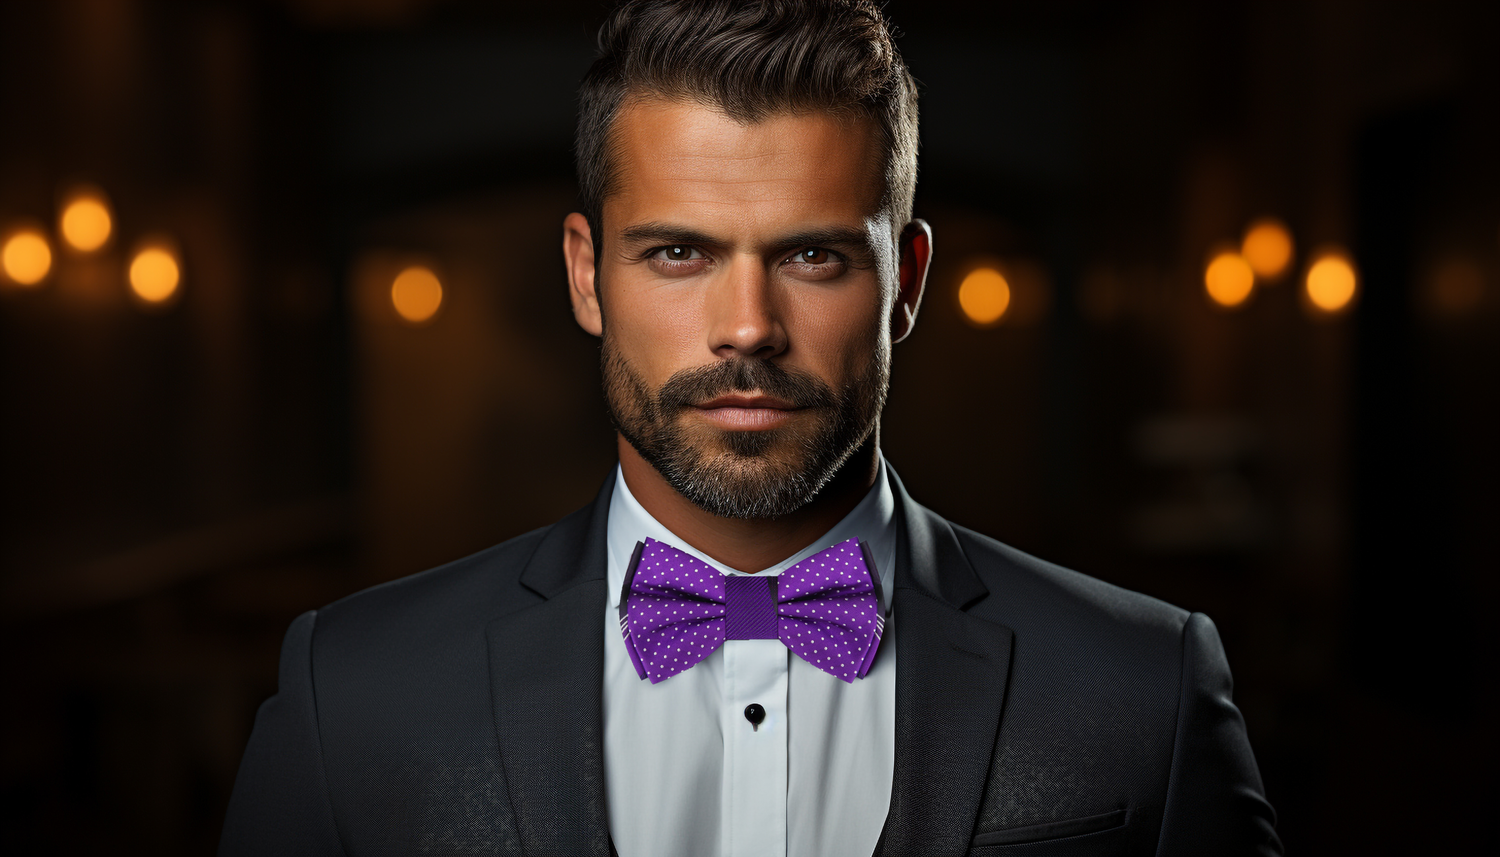 Purple Bow Tie on Man Wearing Suit View 2